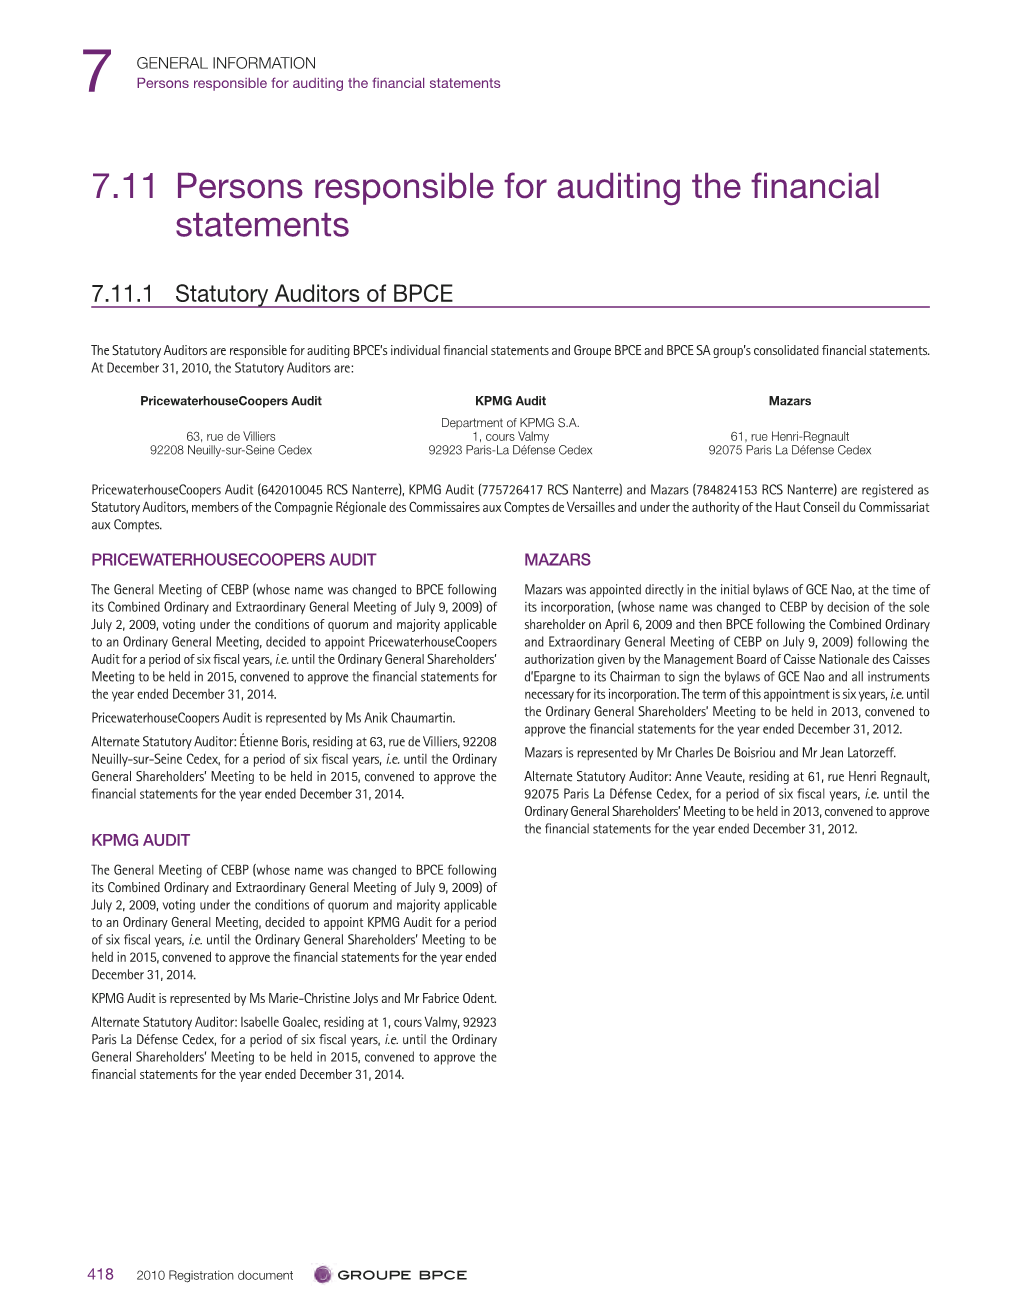 7.11 Persons Responsible for Auditing the Financial Statements